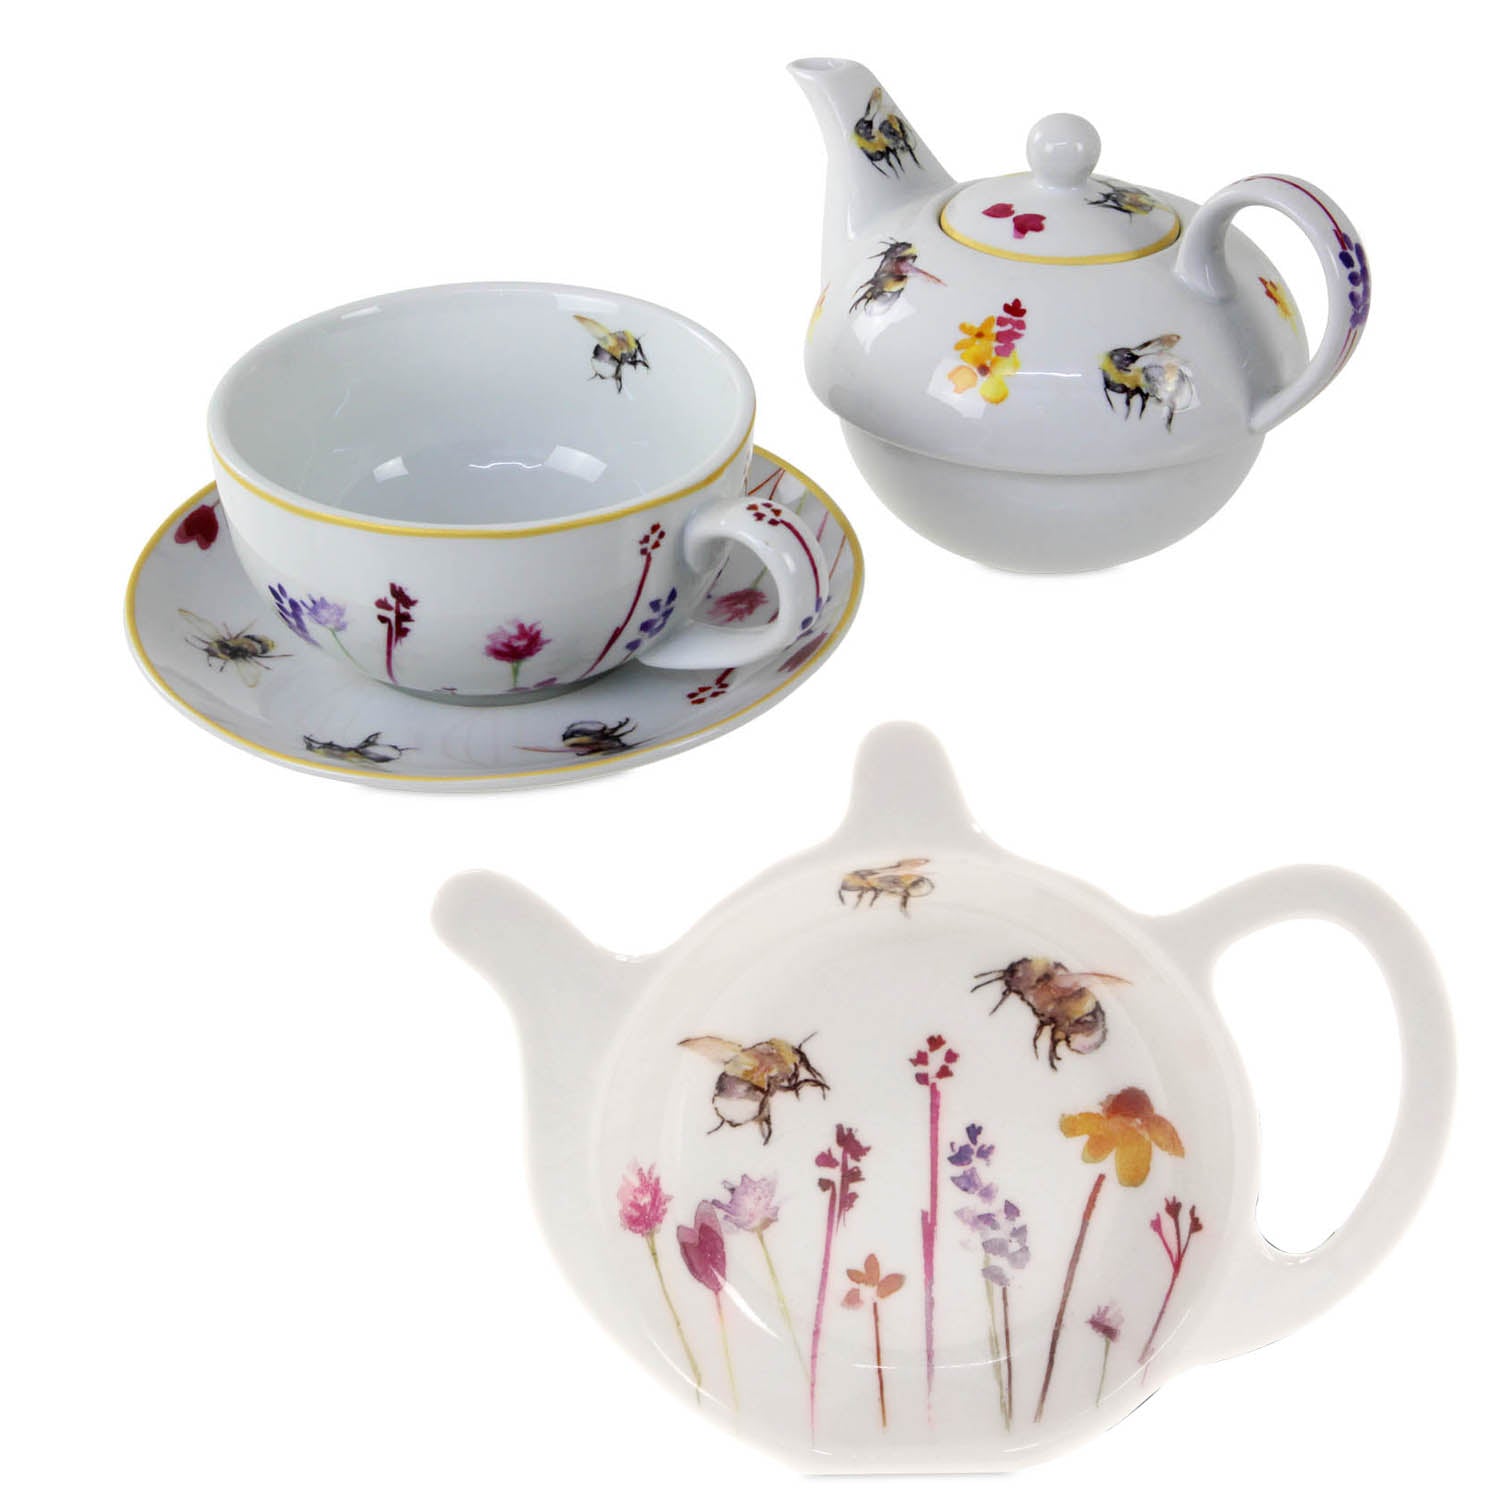 2-pc Bees & Flowers Tea for One & Tea Bag Tidy Set- Floral